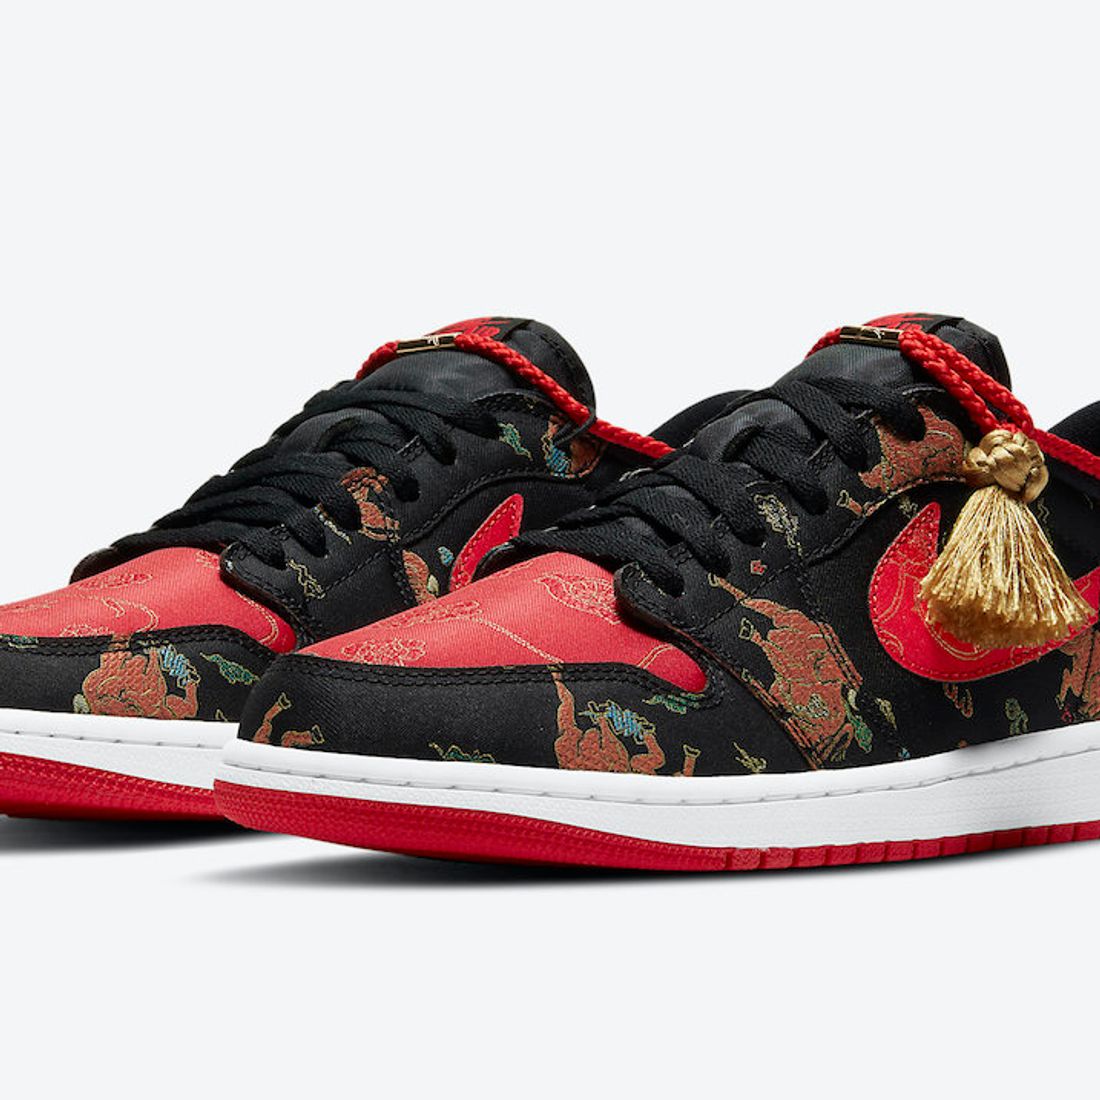 Hotellet ulovlig Motherland The Air Jordan 1 Low 'Chinese New Year' 2021 is Limited to 8500 Pairs -  Sneaker Freaker